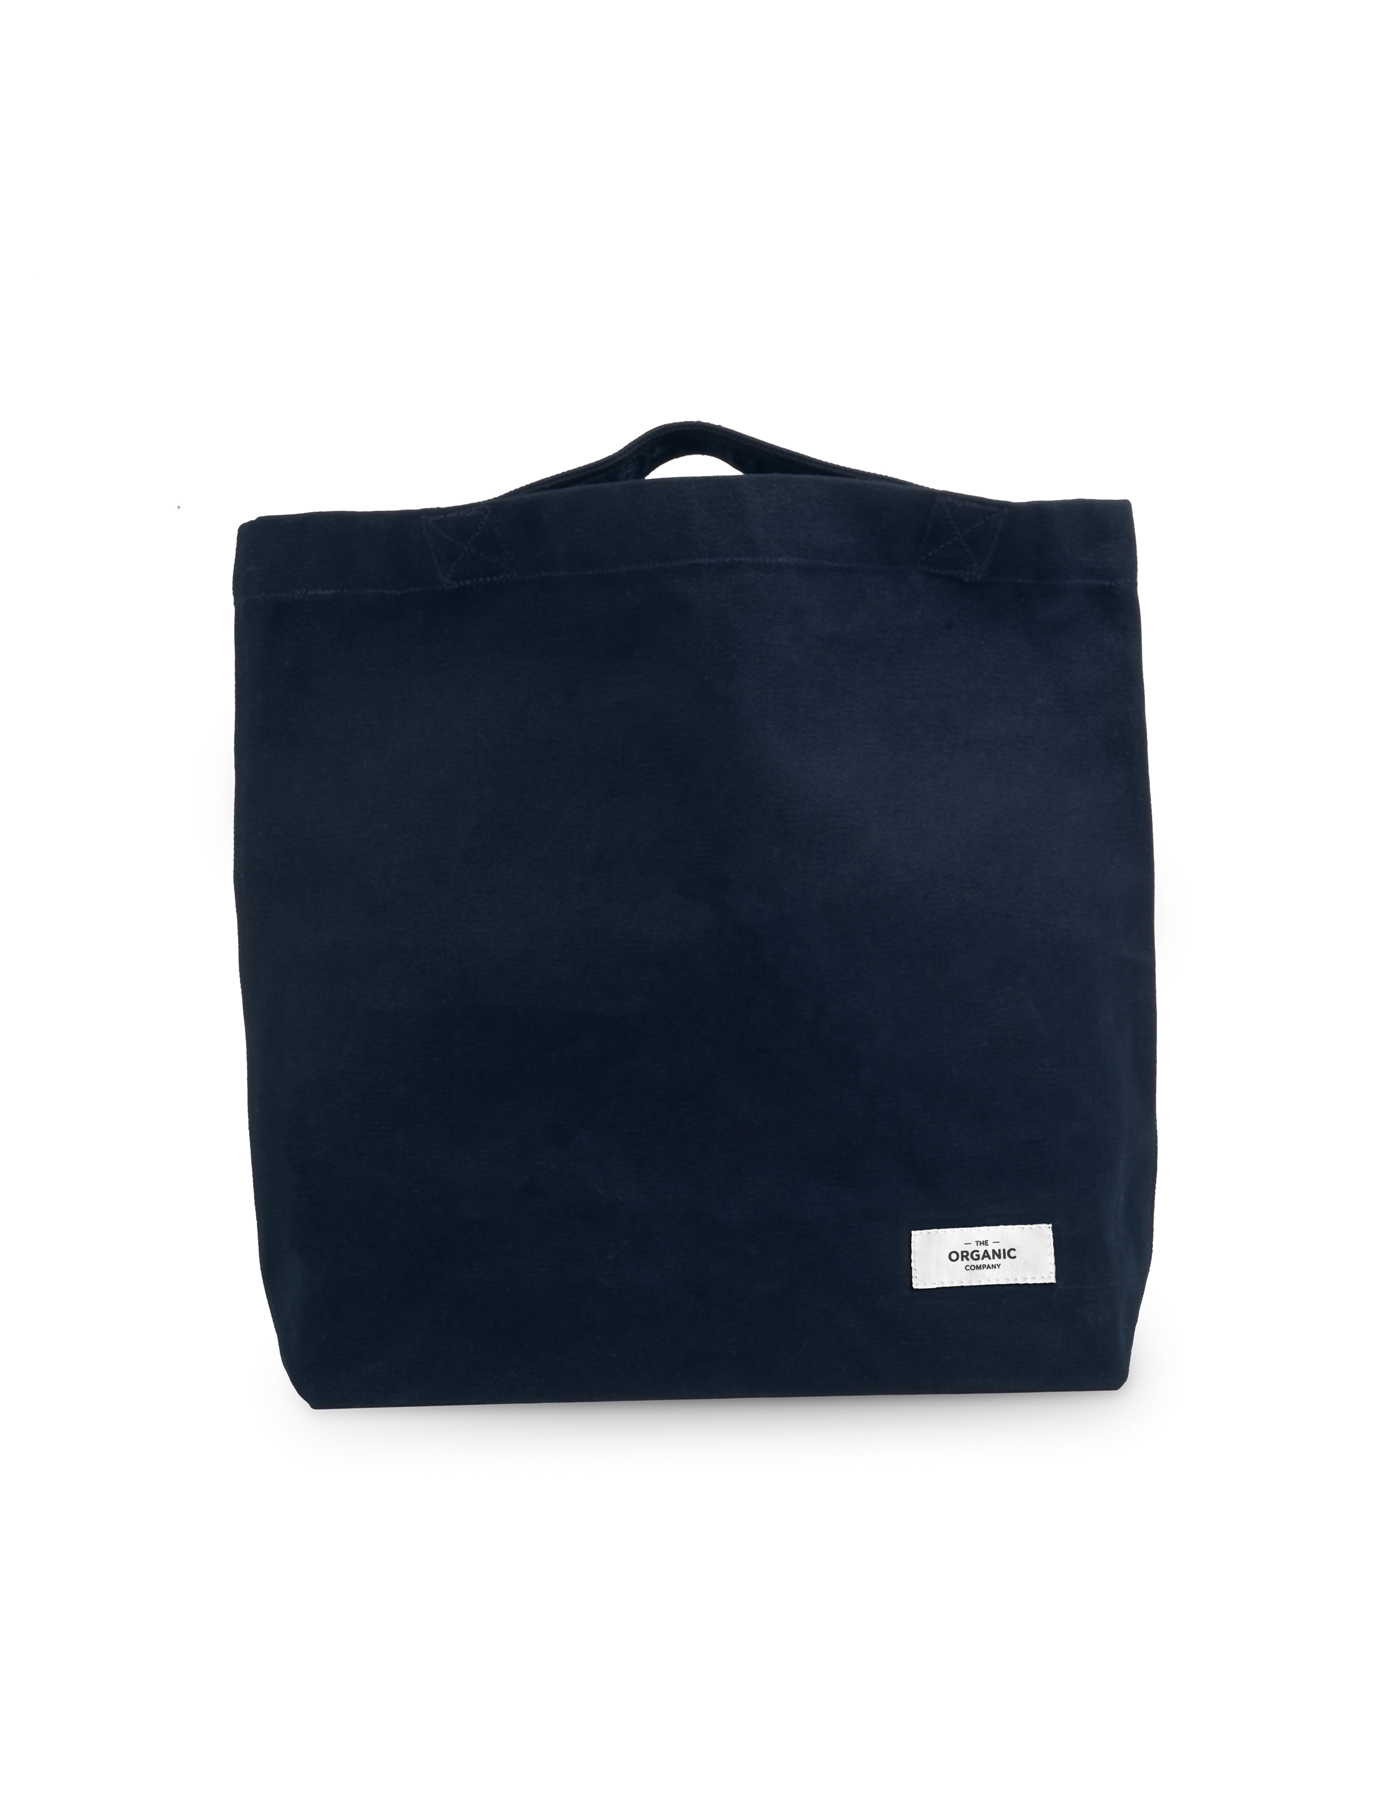 The Organic Company Navy My Organic Cotton Bag Designed for Function